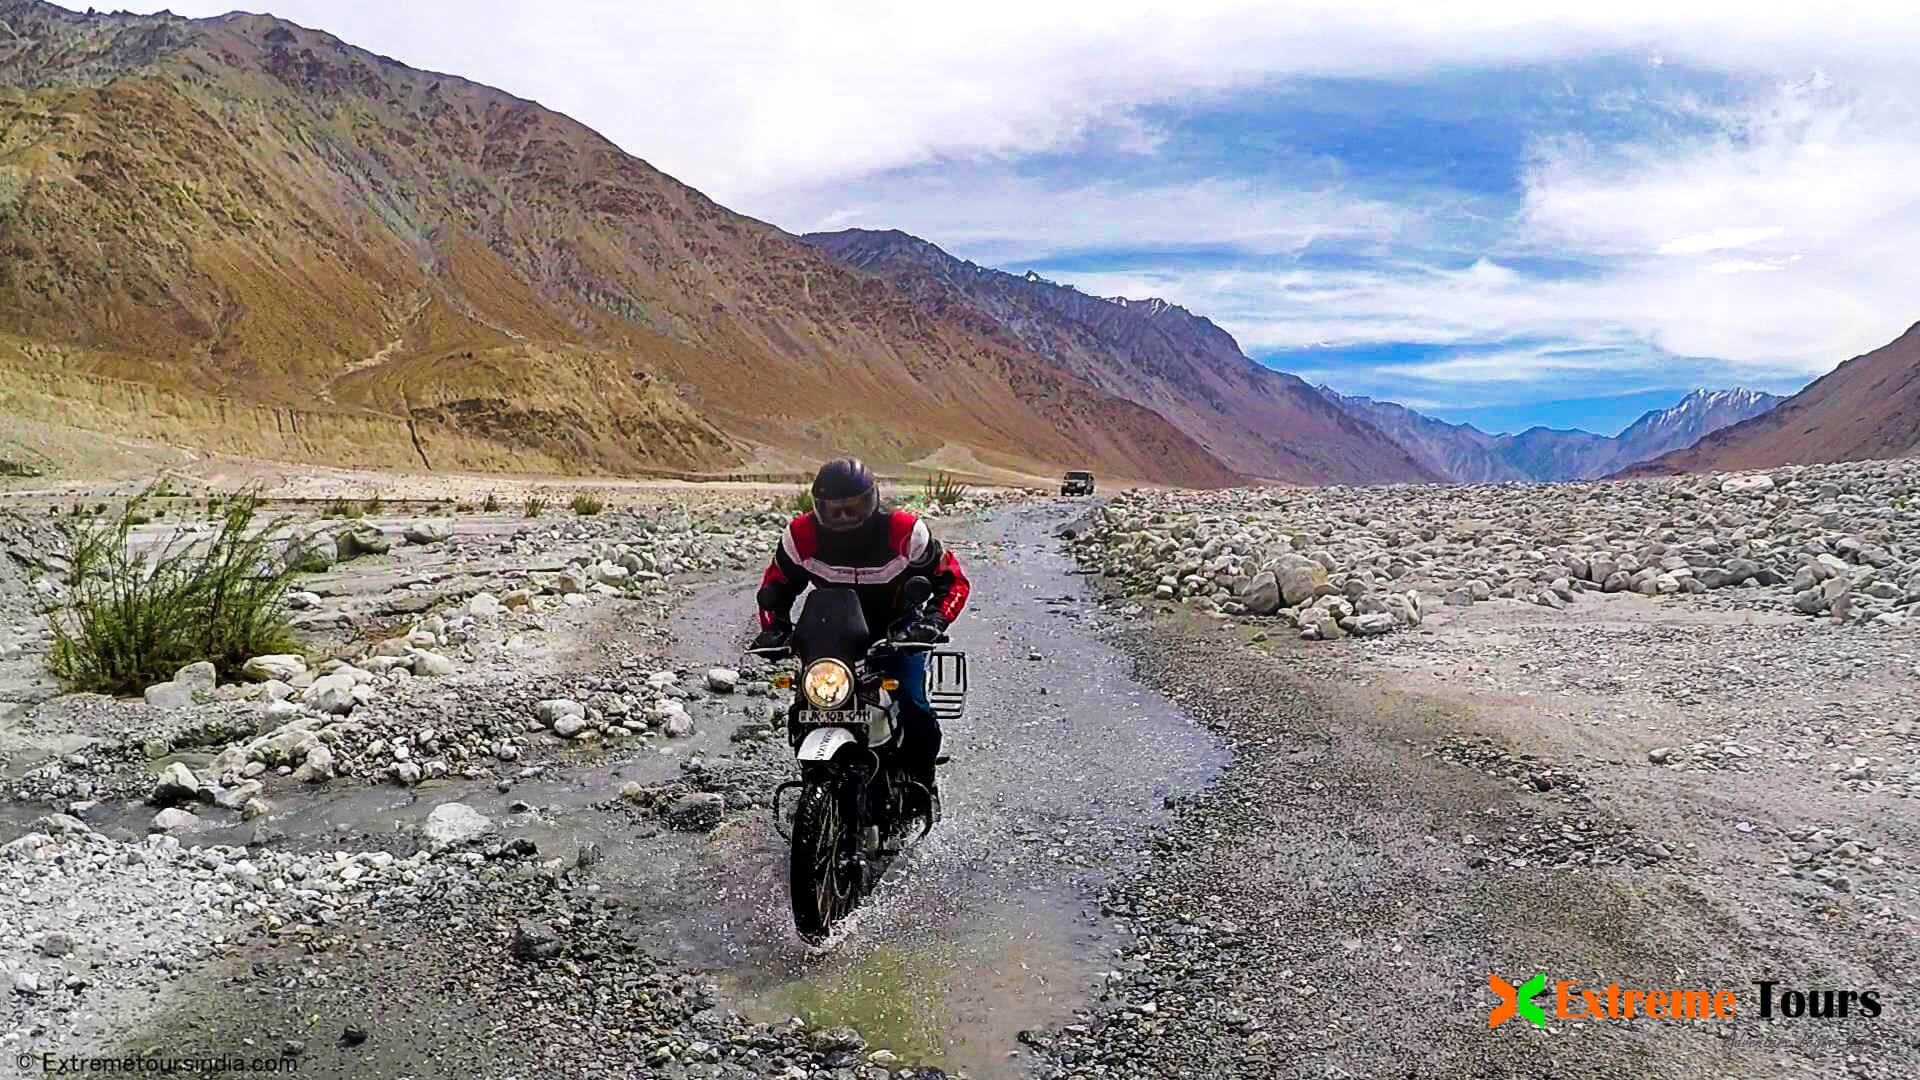 Off road motorcycle tour